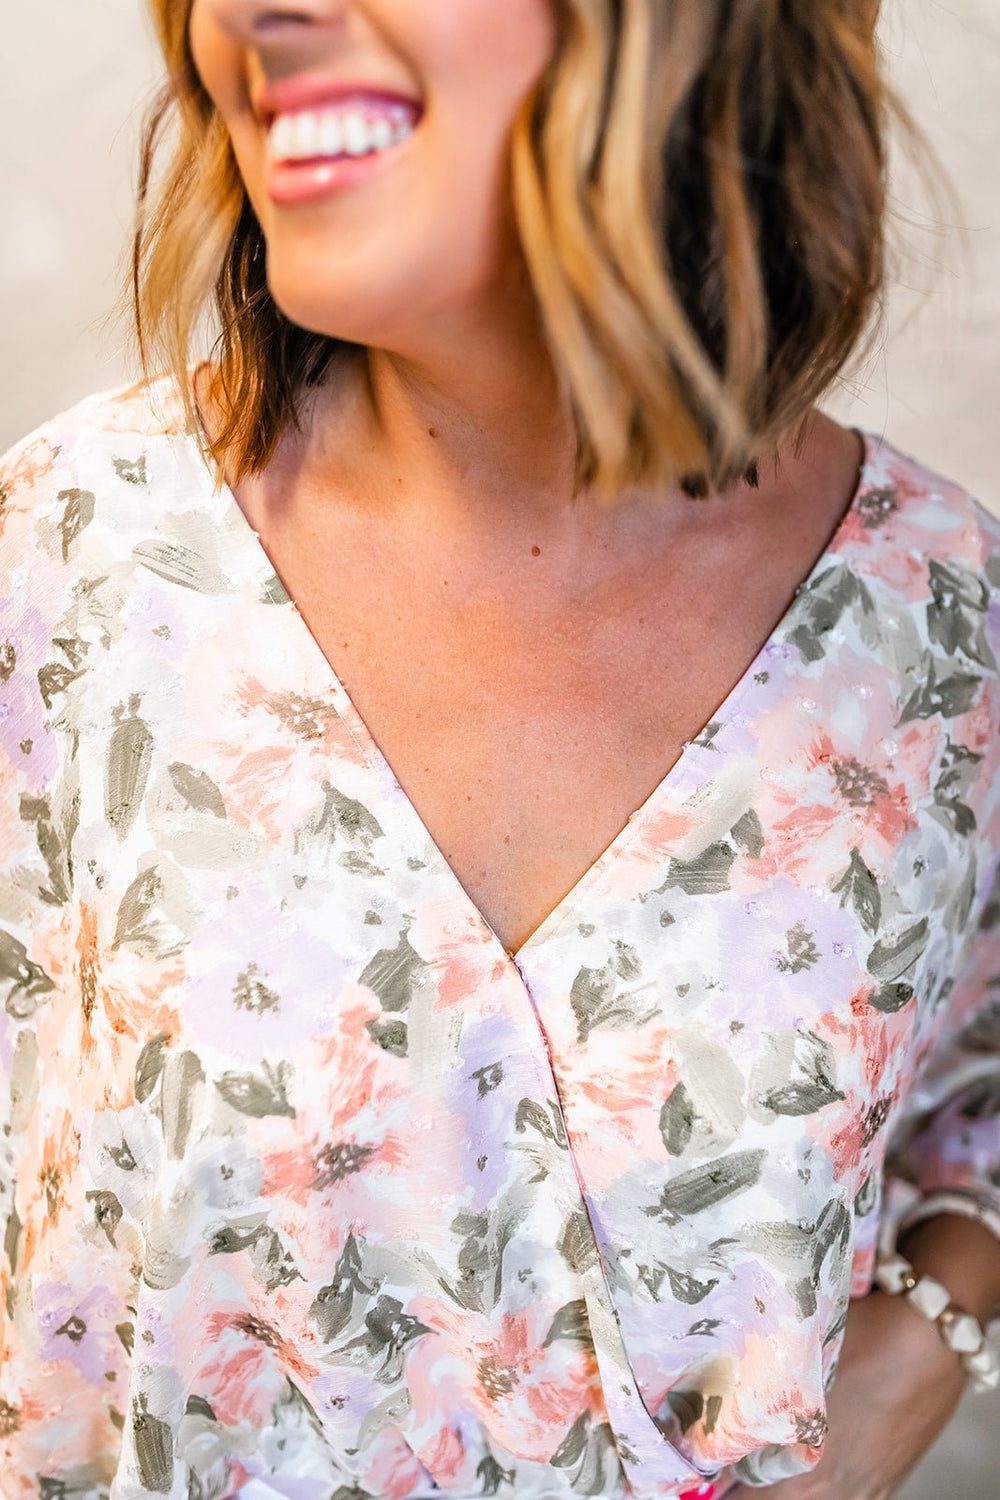 One Eleven Olive Boutique The Rosa Bodysuit Isn't she lovely?! The Rosa Bodysuit features a gorgeous floral detail throughout and a fun flared sleeve detail! This beauty is perfect for summer with it's lightwe